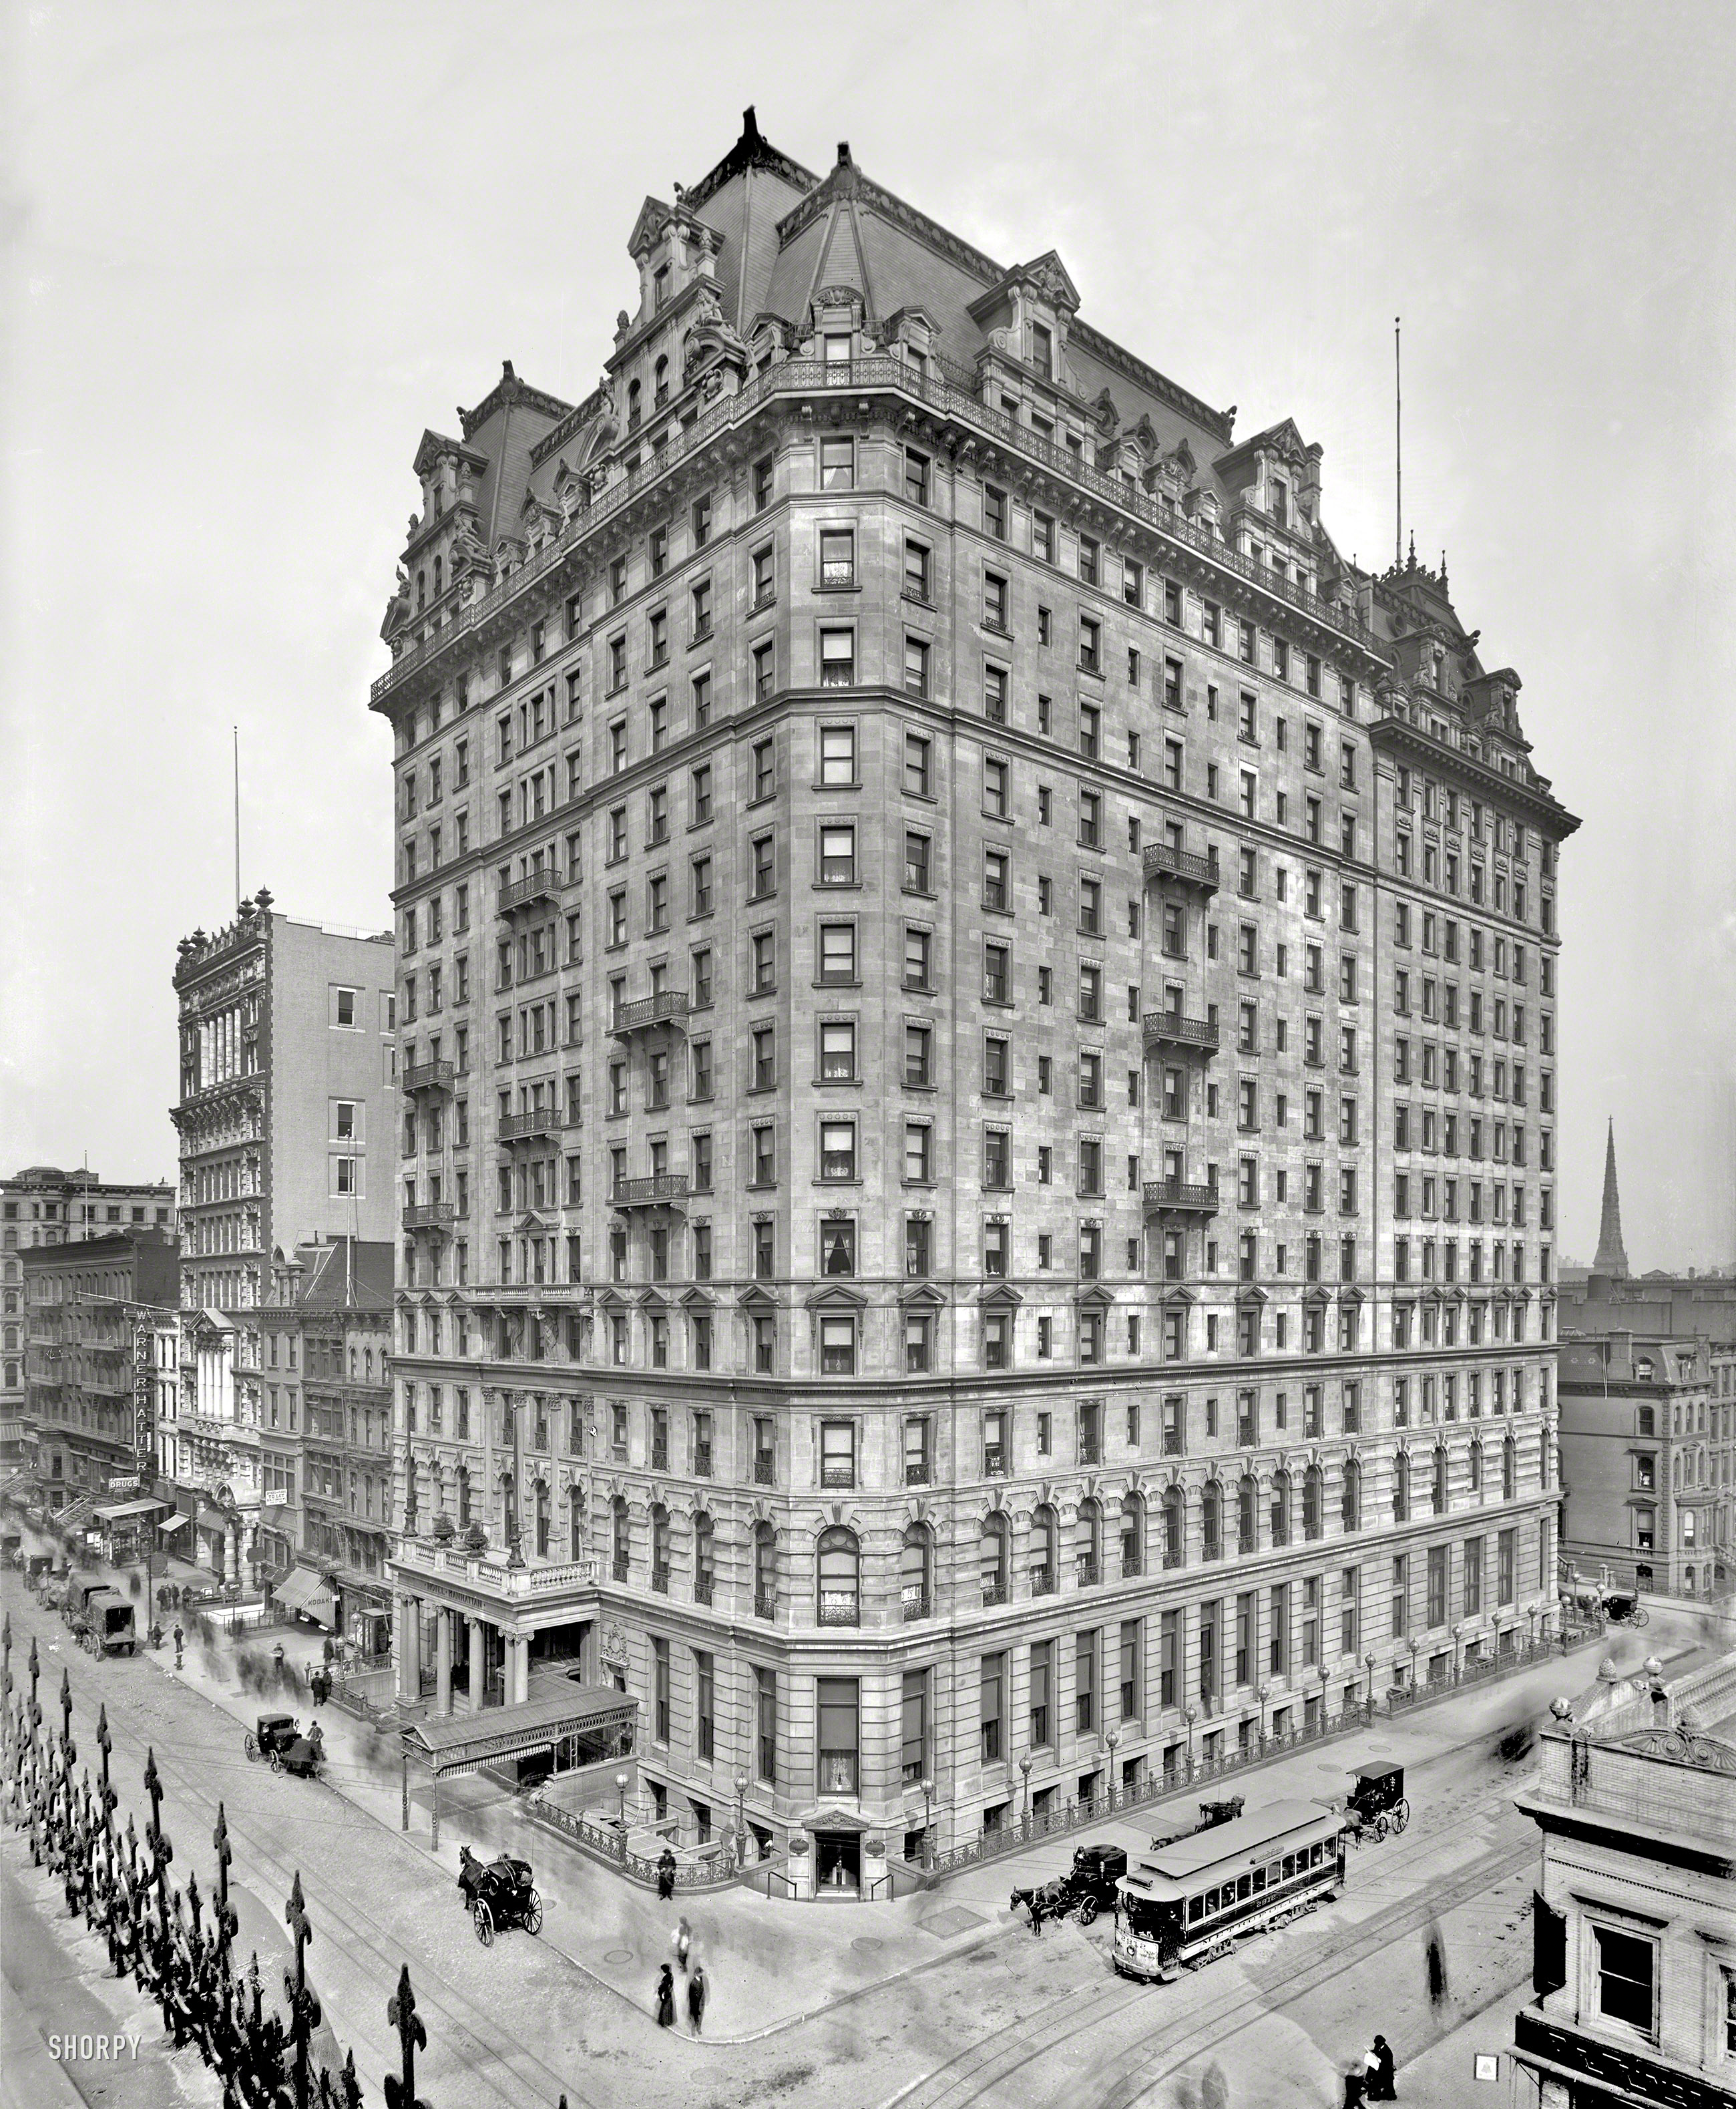 New York circa 1904. "Hotel Manhattan, Madison Avenue and 42nd Street." 8x10 inch dry plate glass negative, Detroit Publishing Company. View full size.